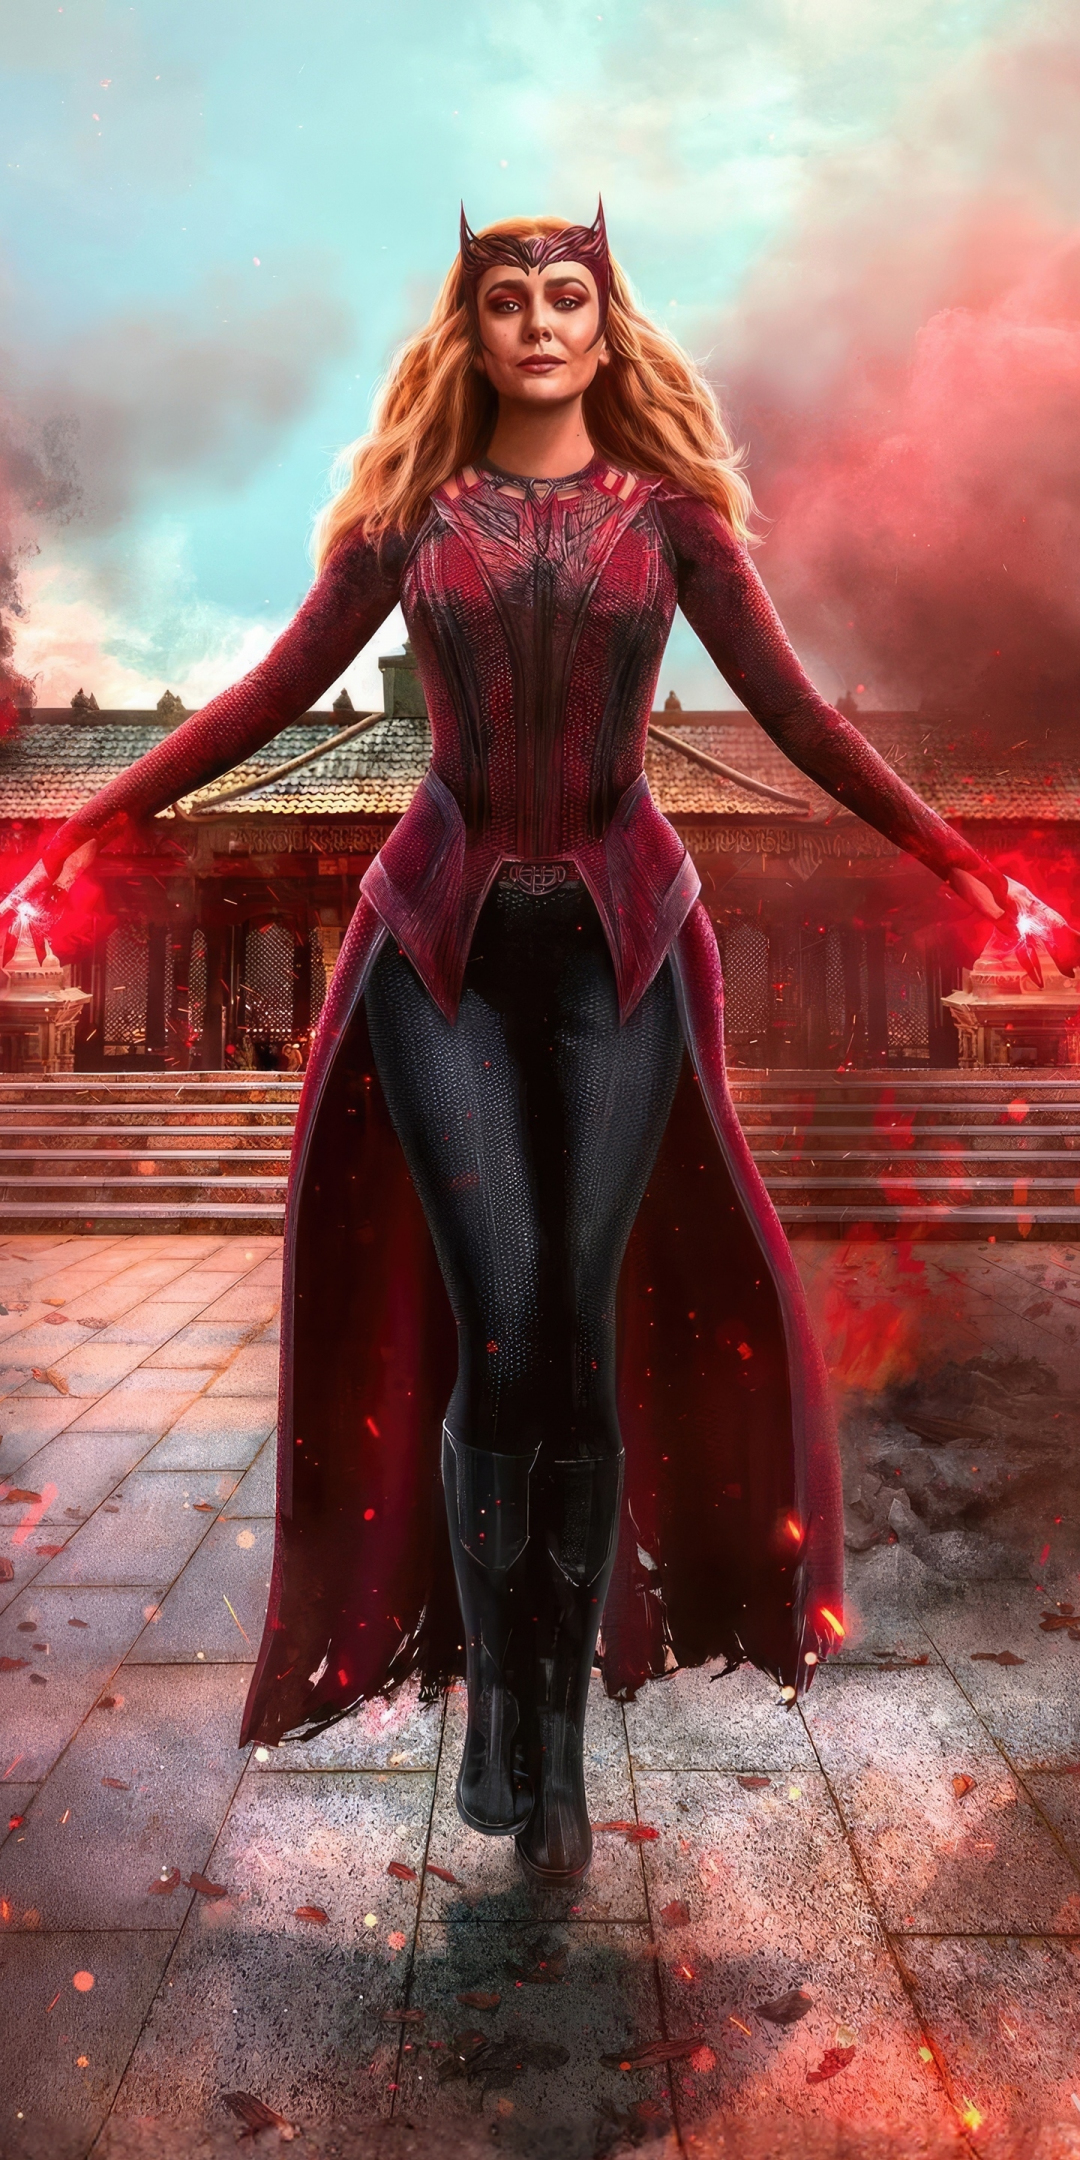 Chaos wizard, scarlet witch, movie, 1080x2160 wallpaper